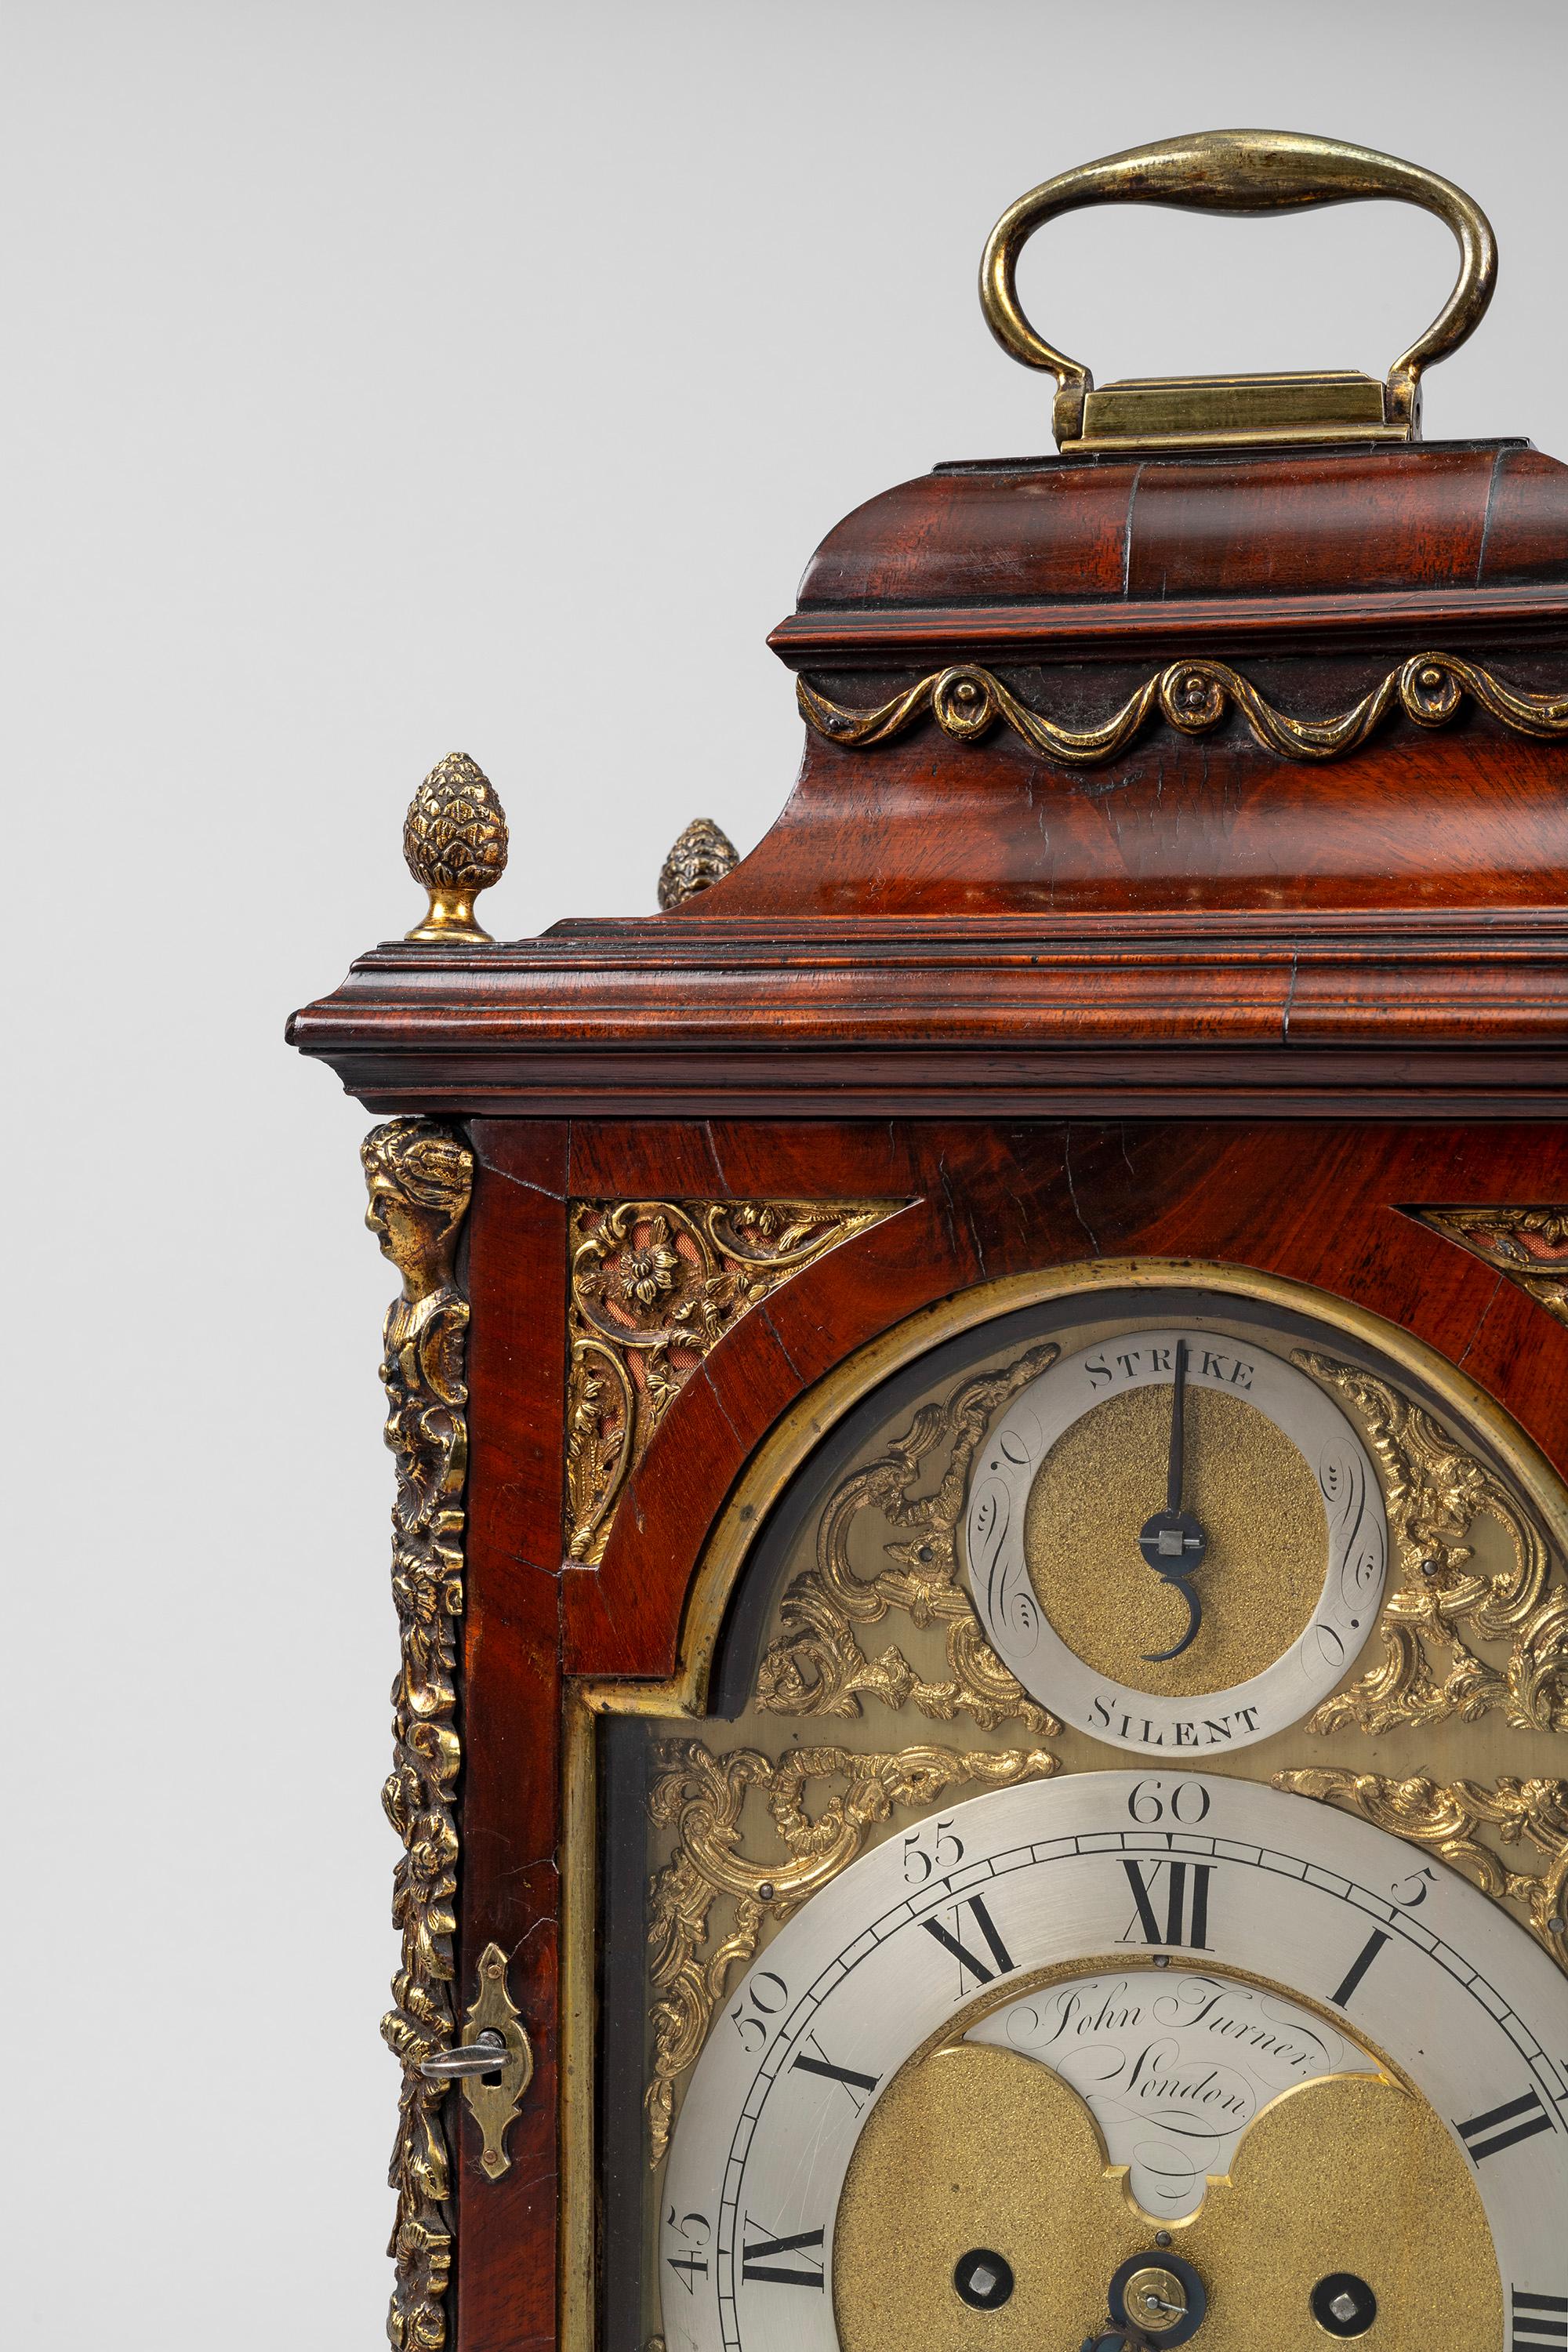 A George III period antique brass-mounted mahogany bracket clock by the London maker John Turner. 

The bell-top case with brass lined front door and brass side frets stands on brass bracket feet and is surmounted with a single brass carrying handle